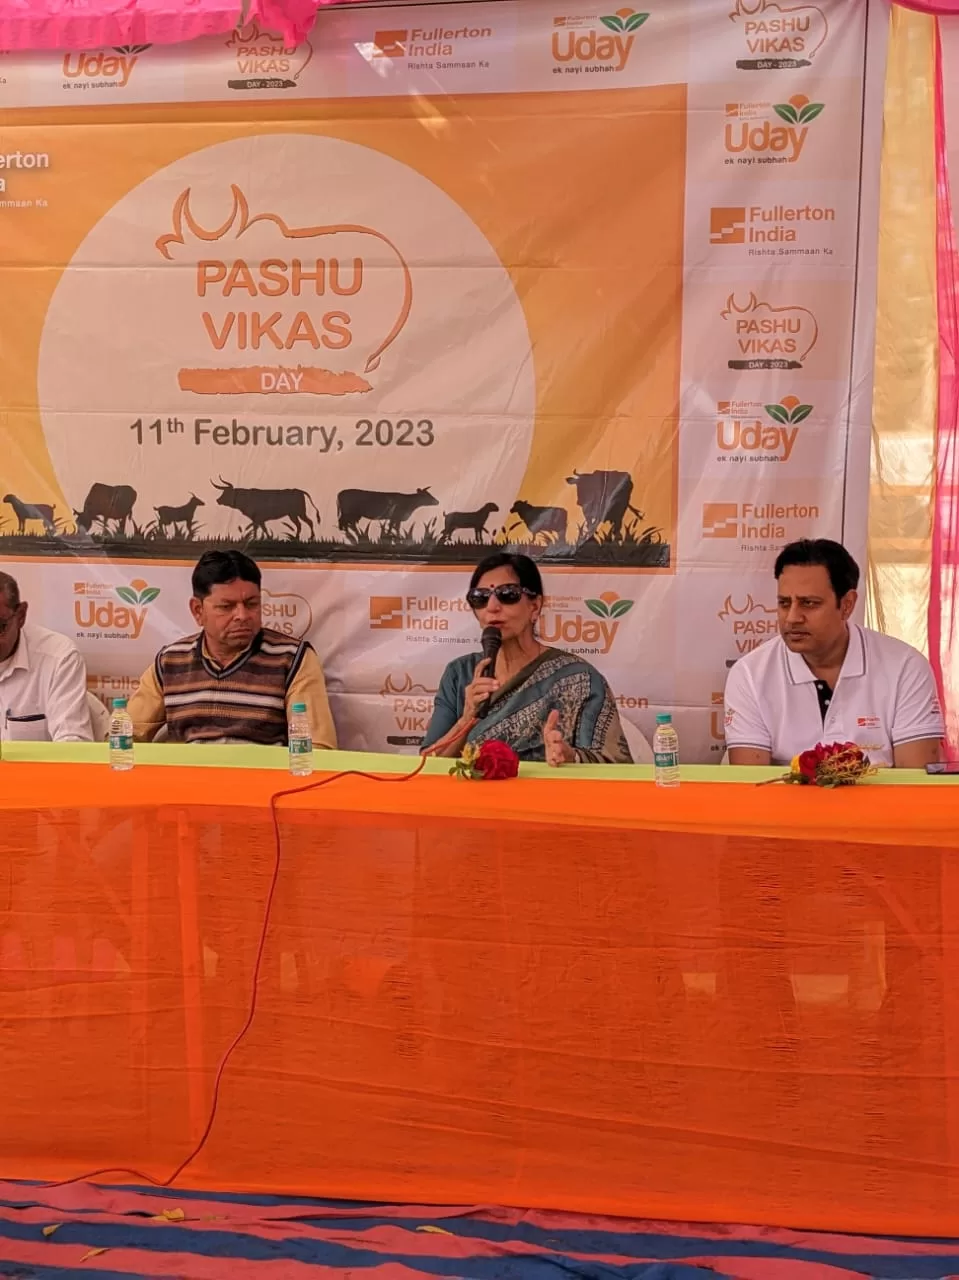 Fullerton India organises 5th edition of Pashu Vikas Day, 3500+ cattle in Gujarat get free treatment